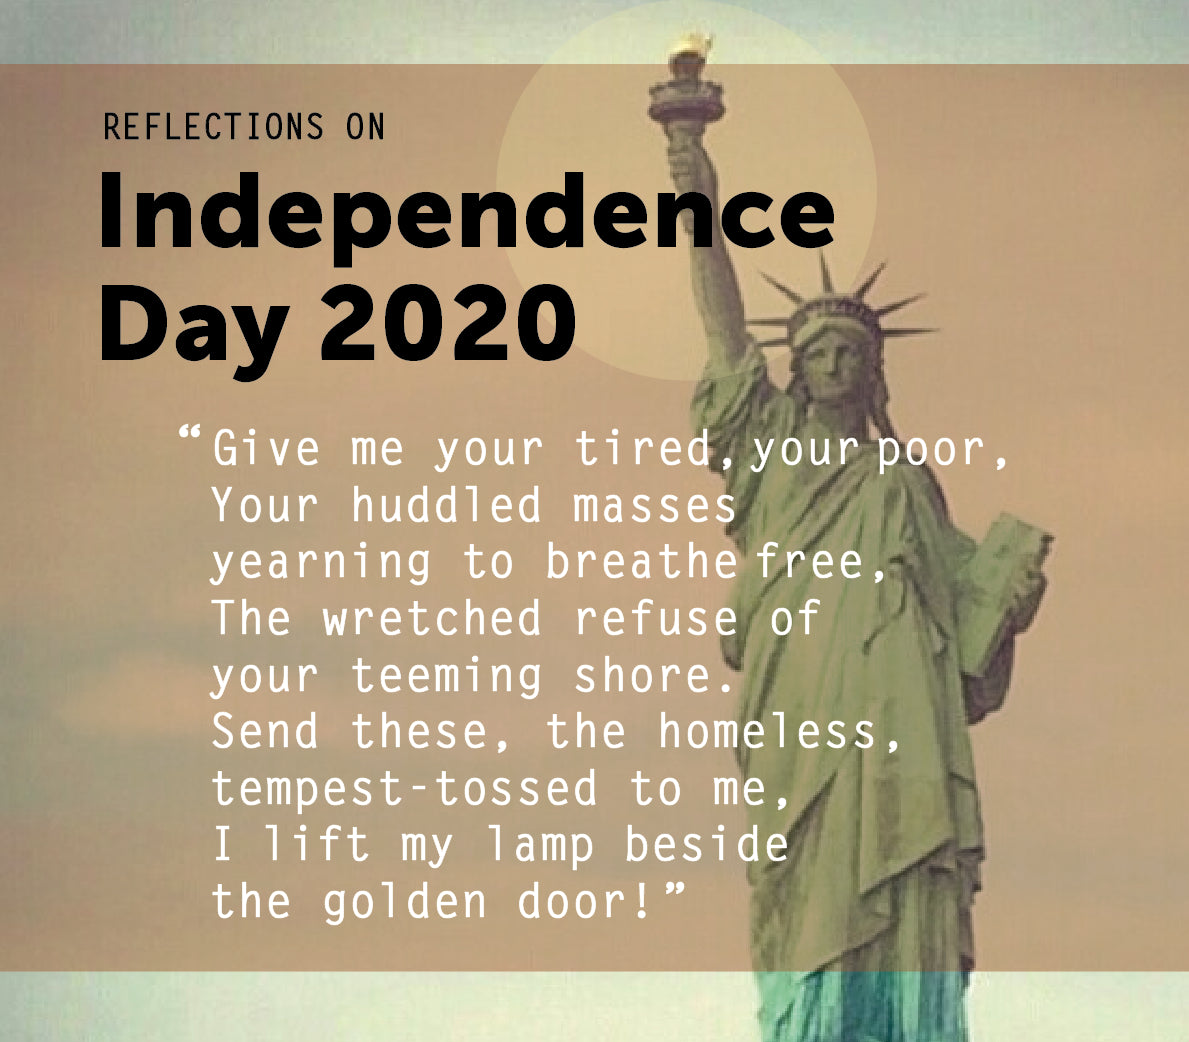 Independence Day 2020: An Immigrant's Reflections on the Fourth of ...